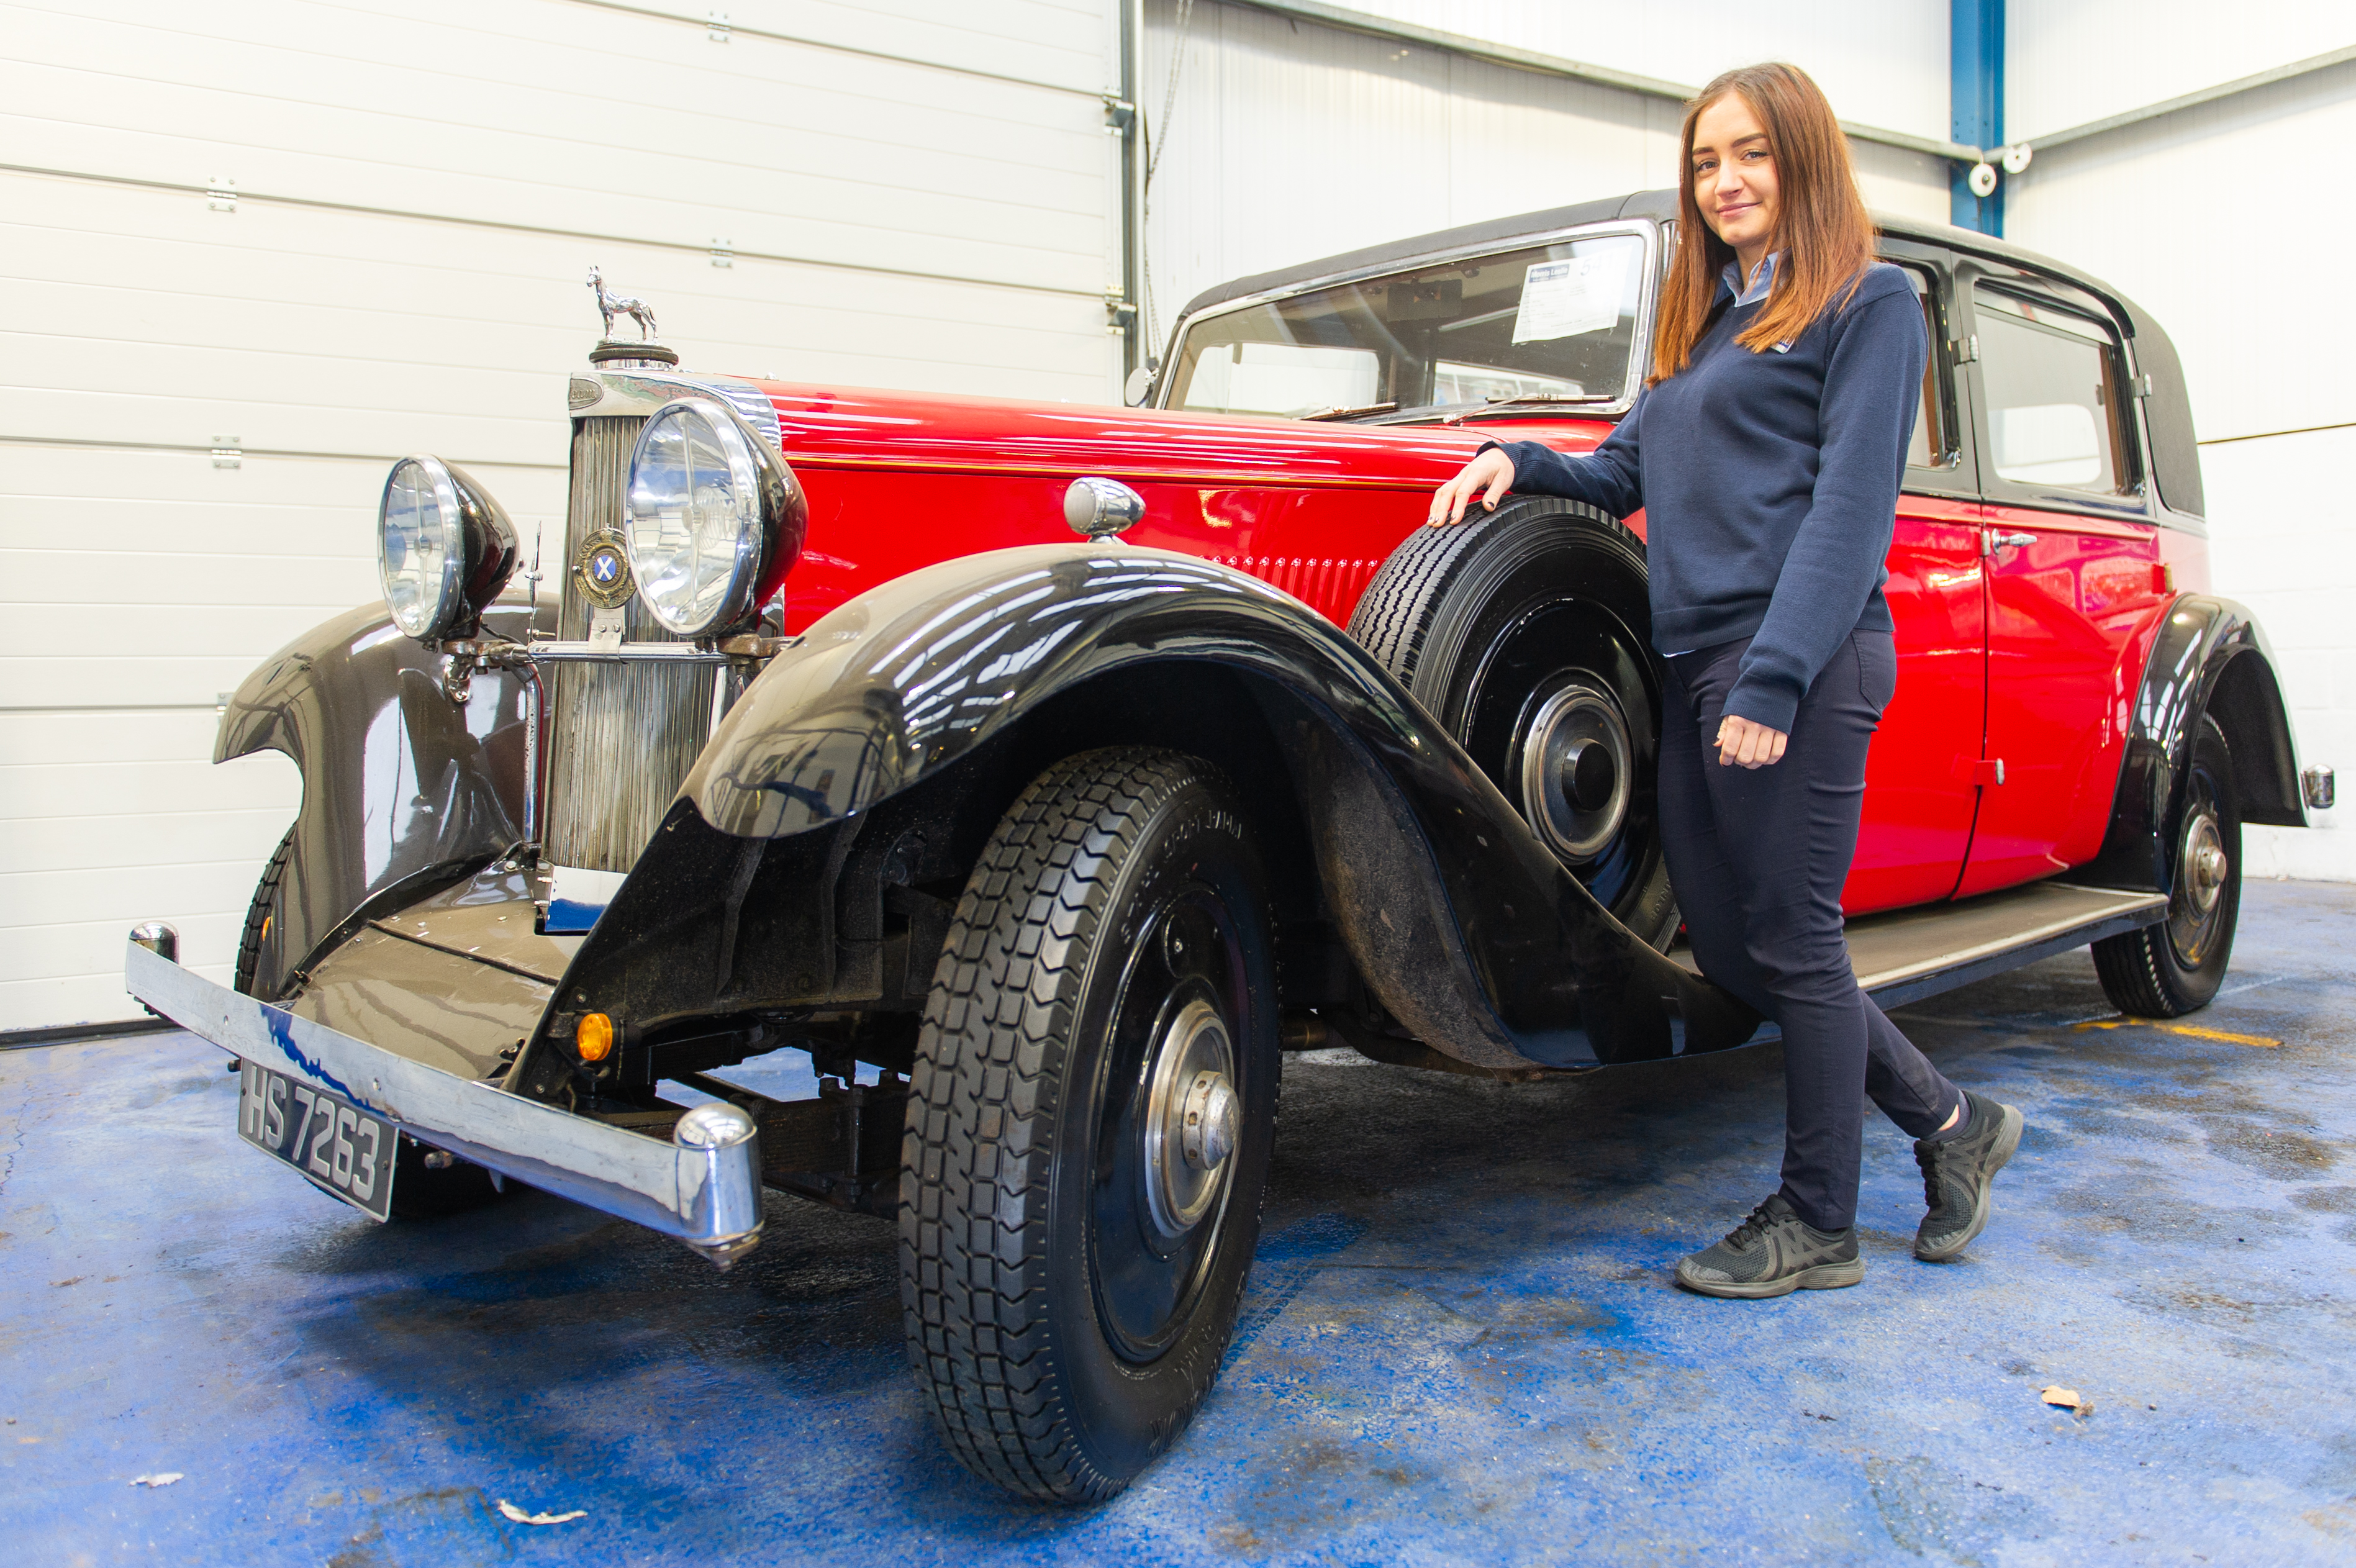 Auction administrator Jade Bloomer with the 1933 Sunbeam 25 Limousine